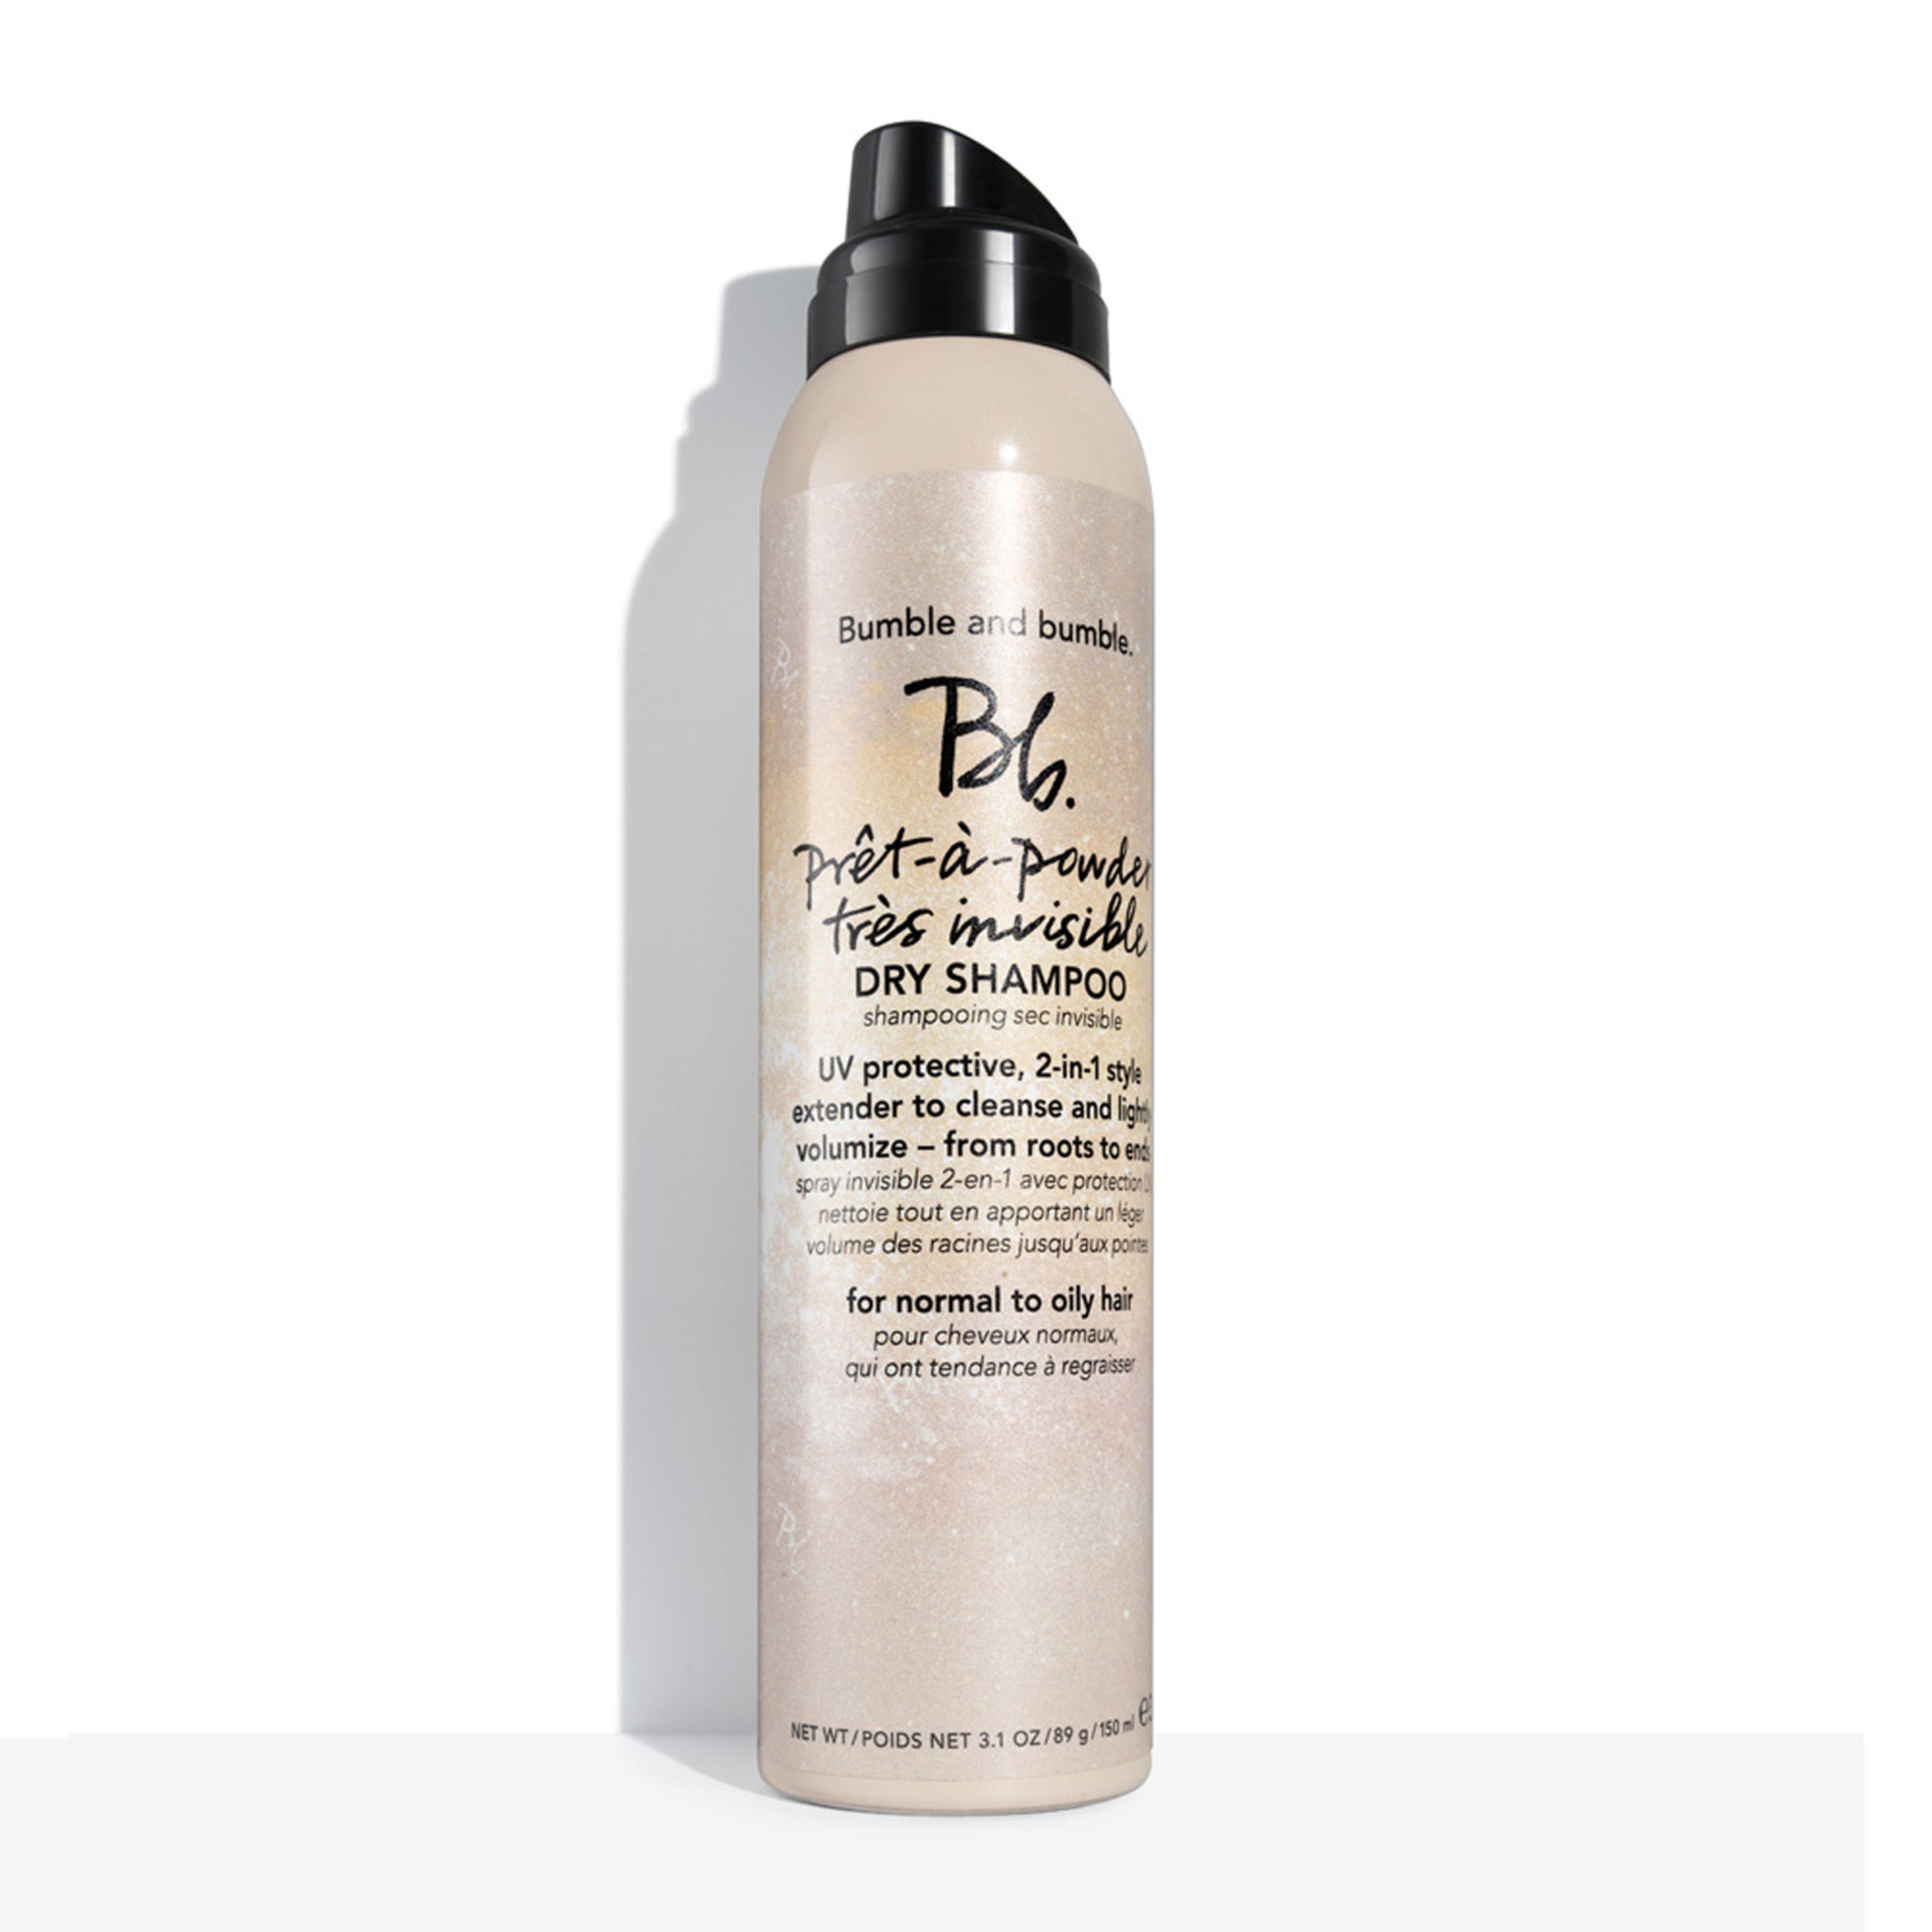 Bumble and bumble Pret-a-powder Tres Invisible Dry Shampoo 1